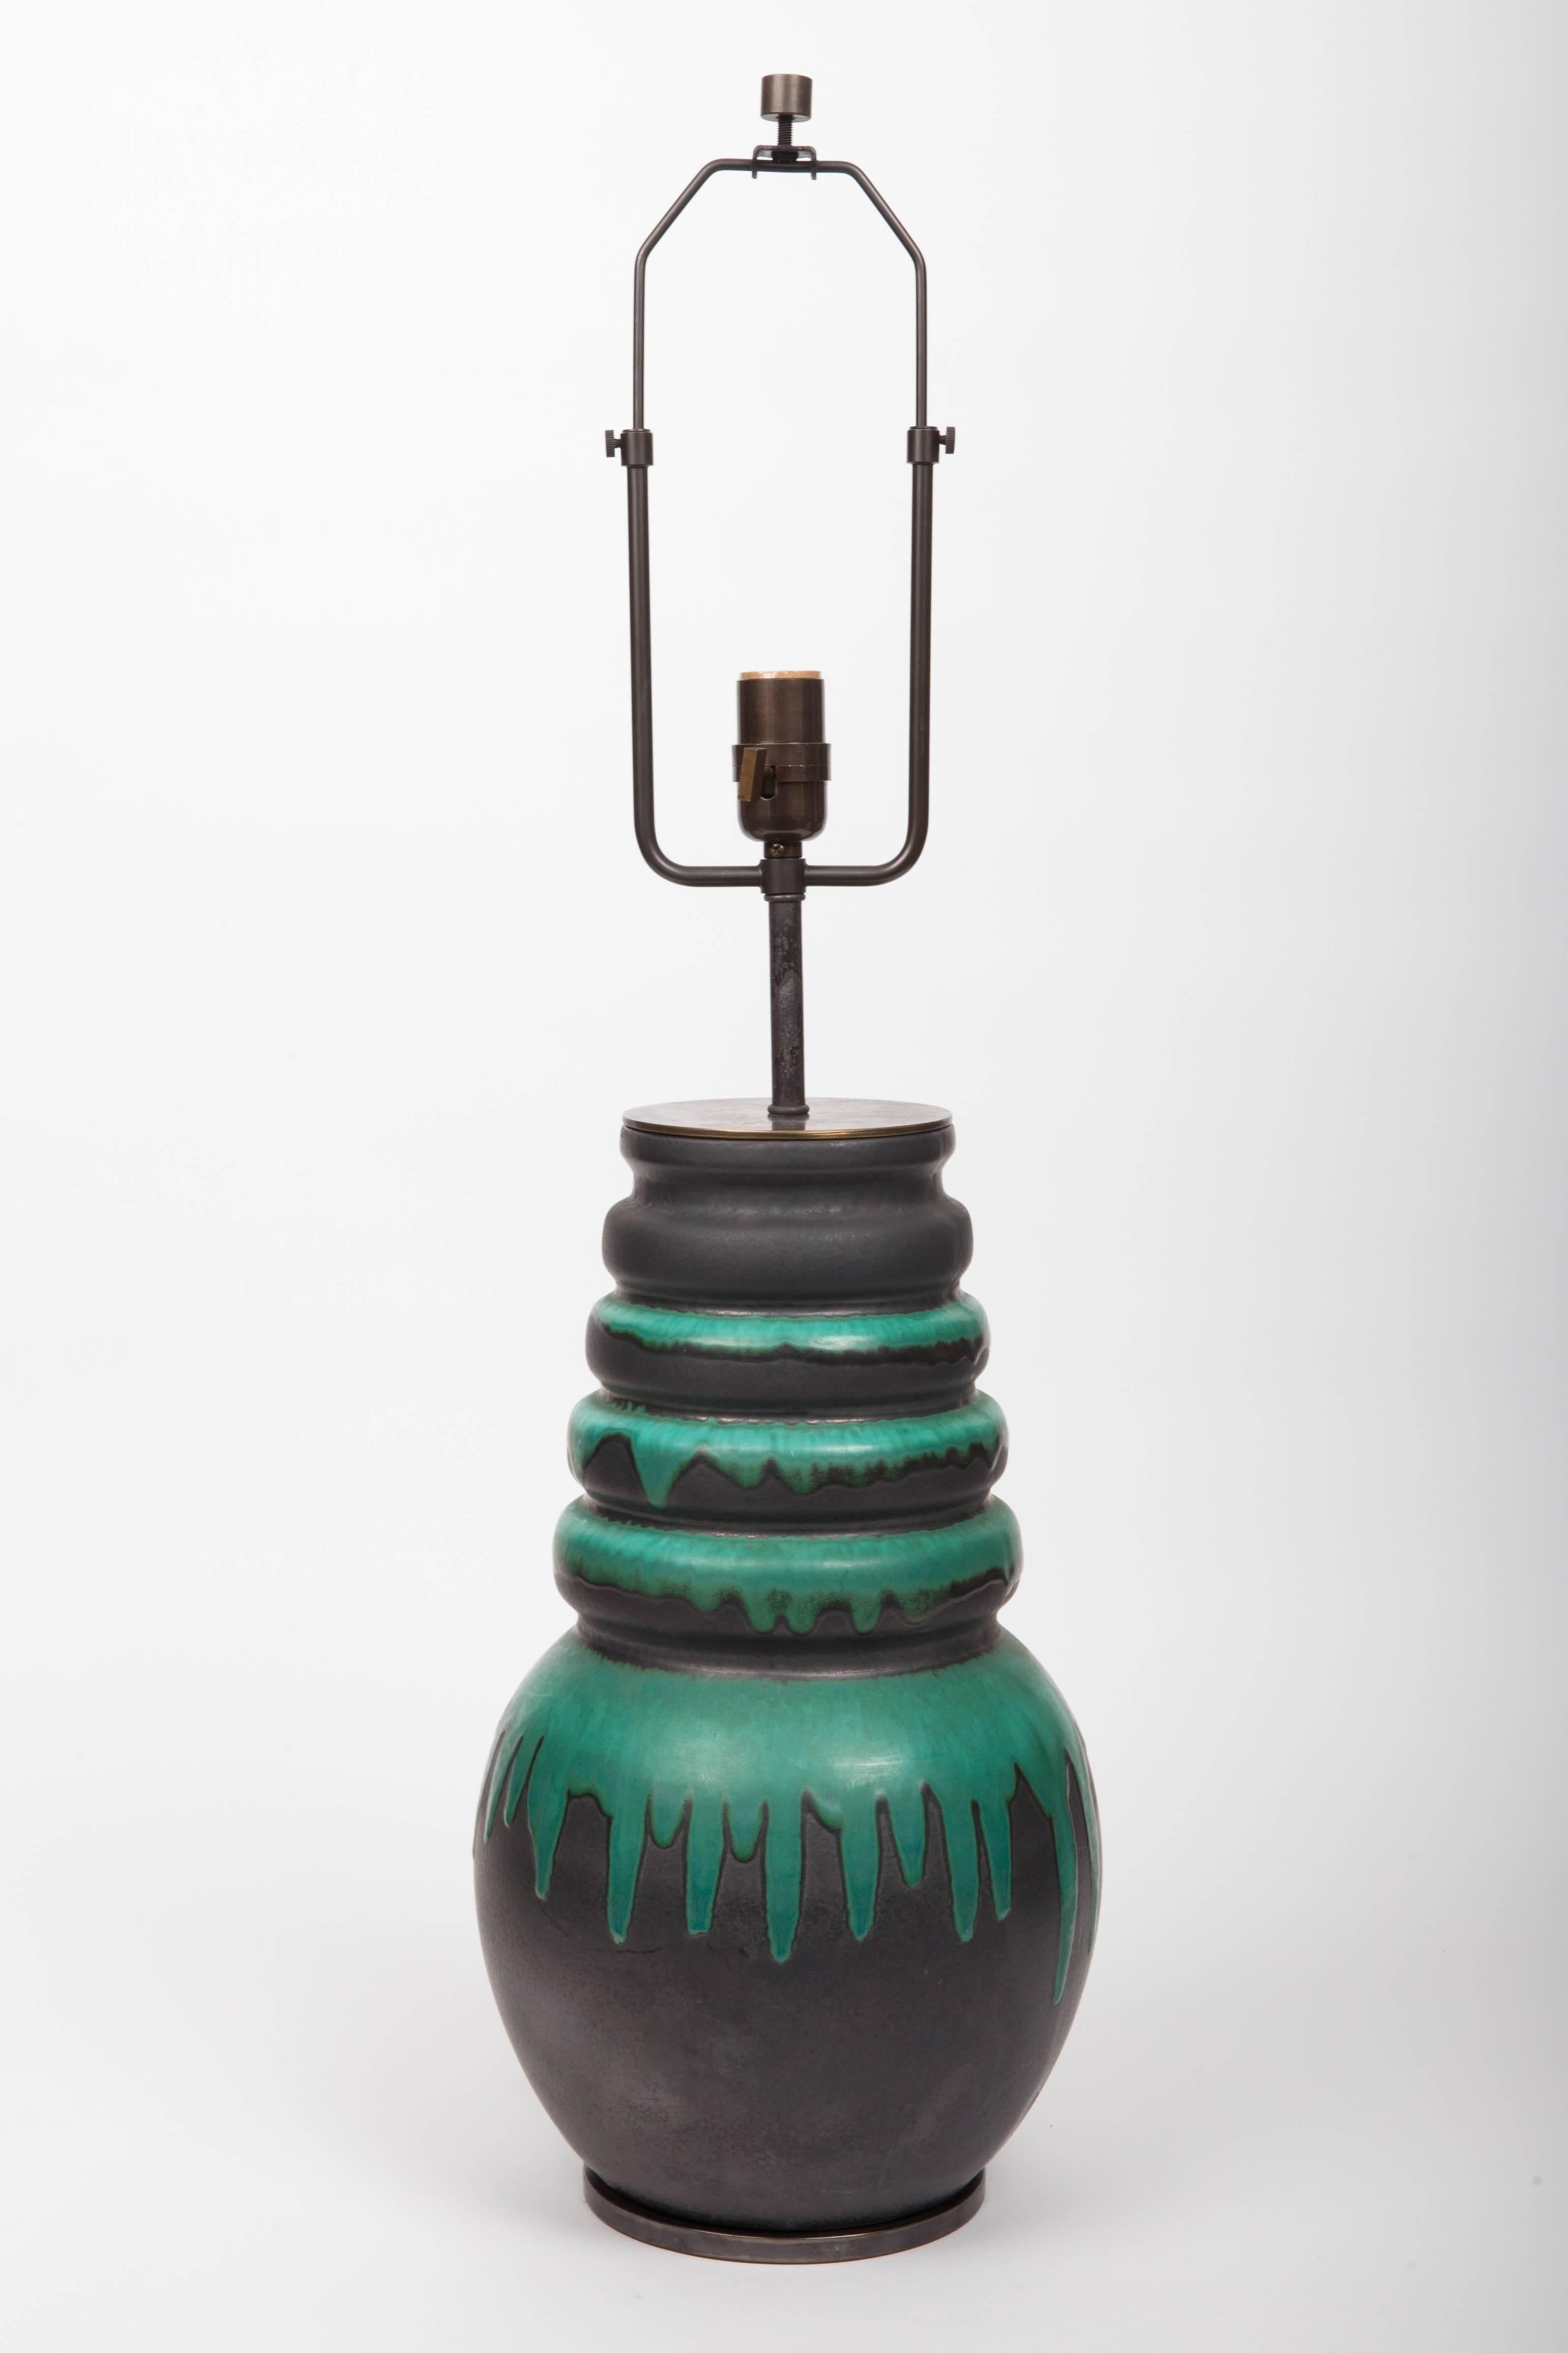 Late 20th Century Black and Green Floor Vase by Scheurich, West Germany, Converted into Lamp